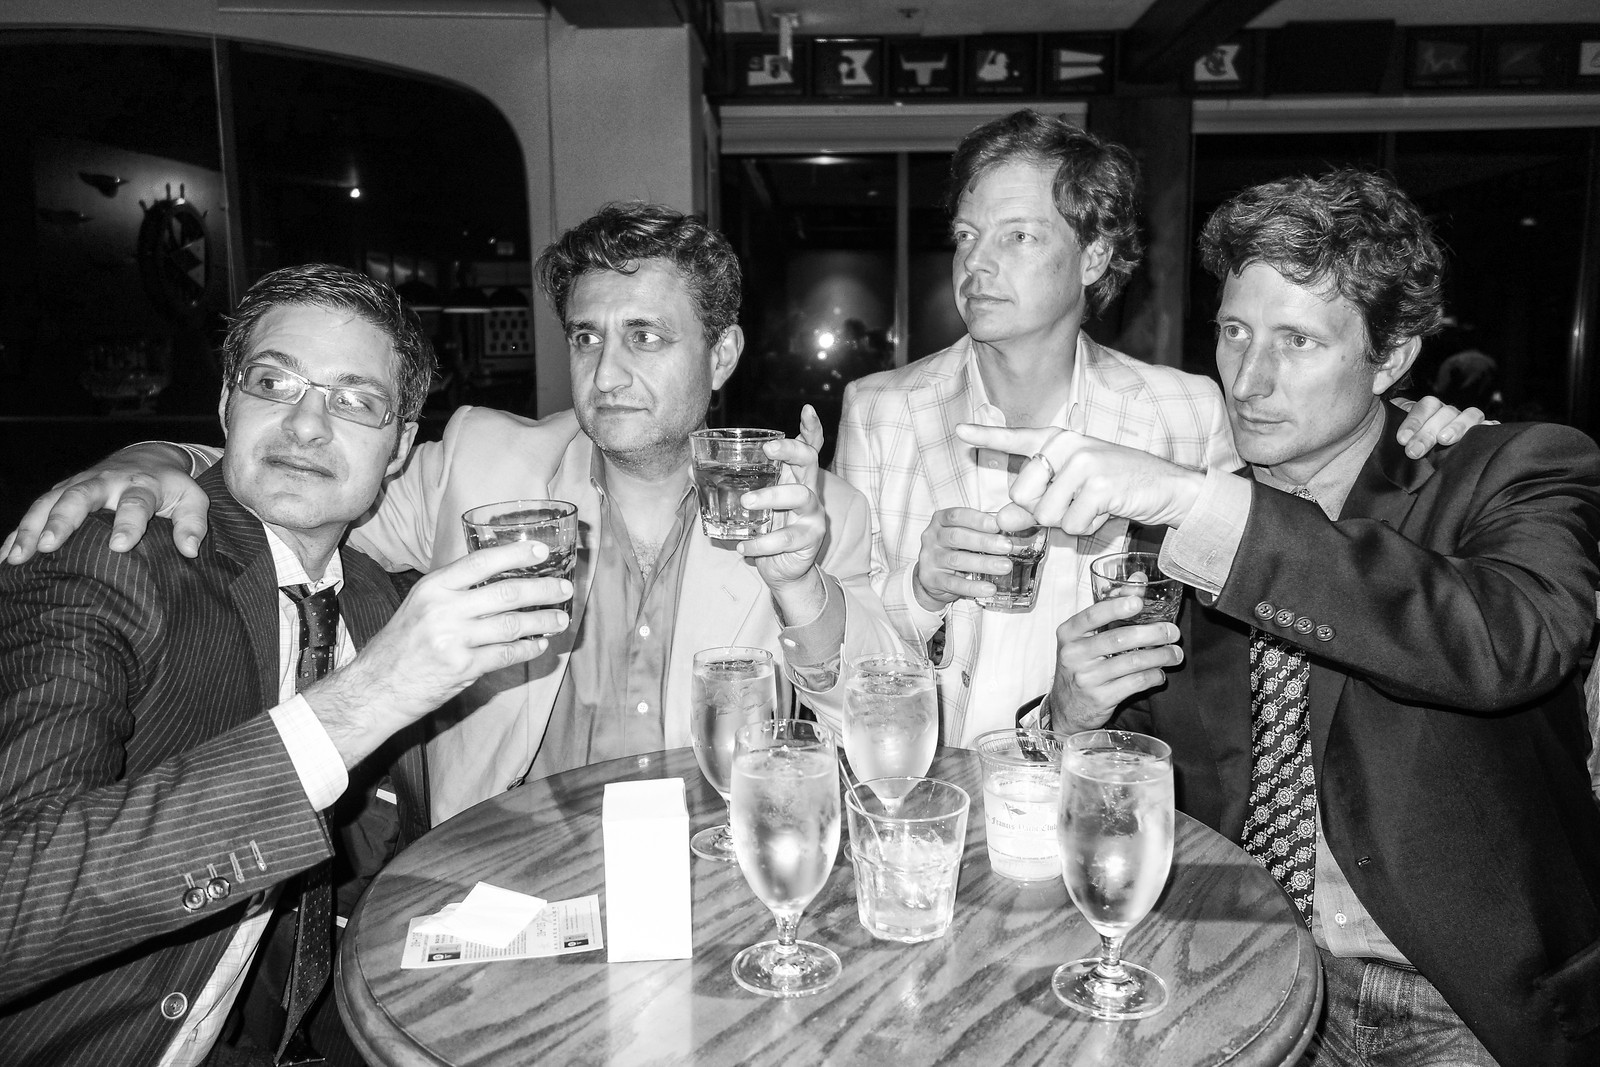 four men posing together with glasses of wine